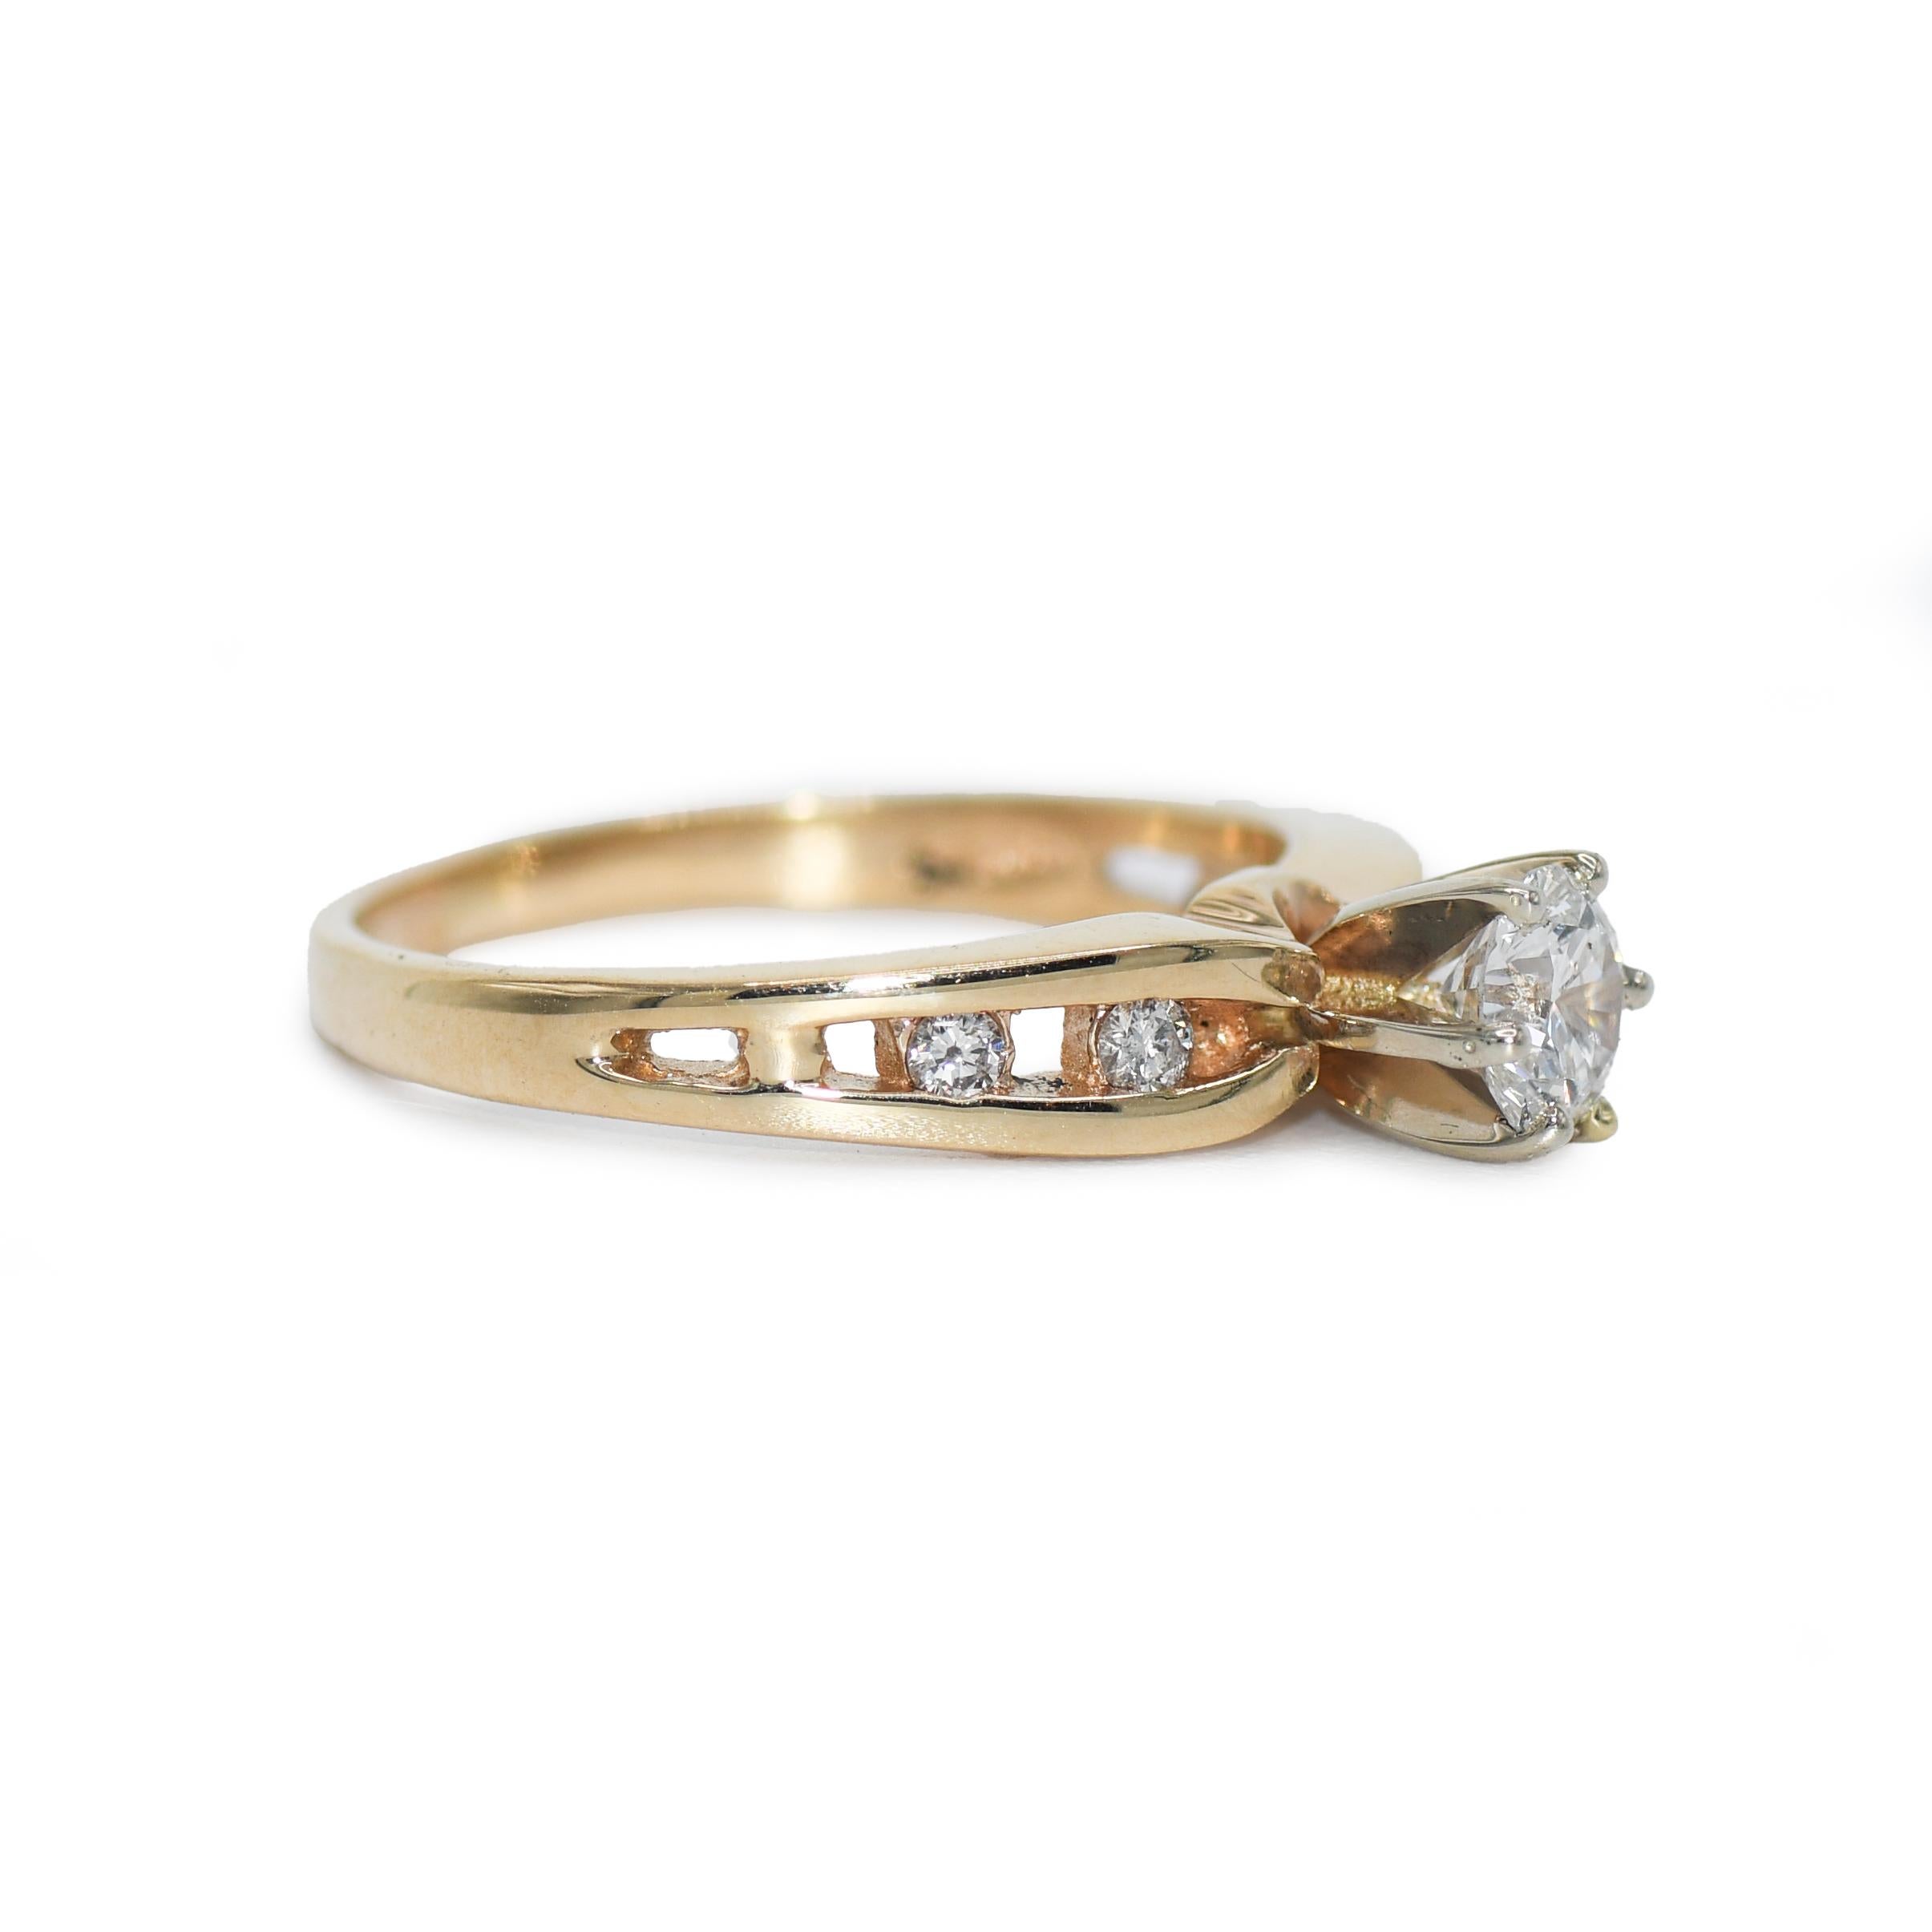 14k yellow gold diamond ring.
The center stone is a round brilliant cut, .45ct, Clarity SI1, Color H-I. 
There are 4 smaller accent diamonds, .50tdw. 
Weighs 3.6gr, stamped 14k
size 7, can be sized up or down for an additional fee
Recently polished,